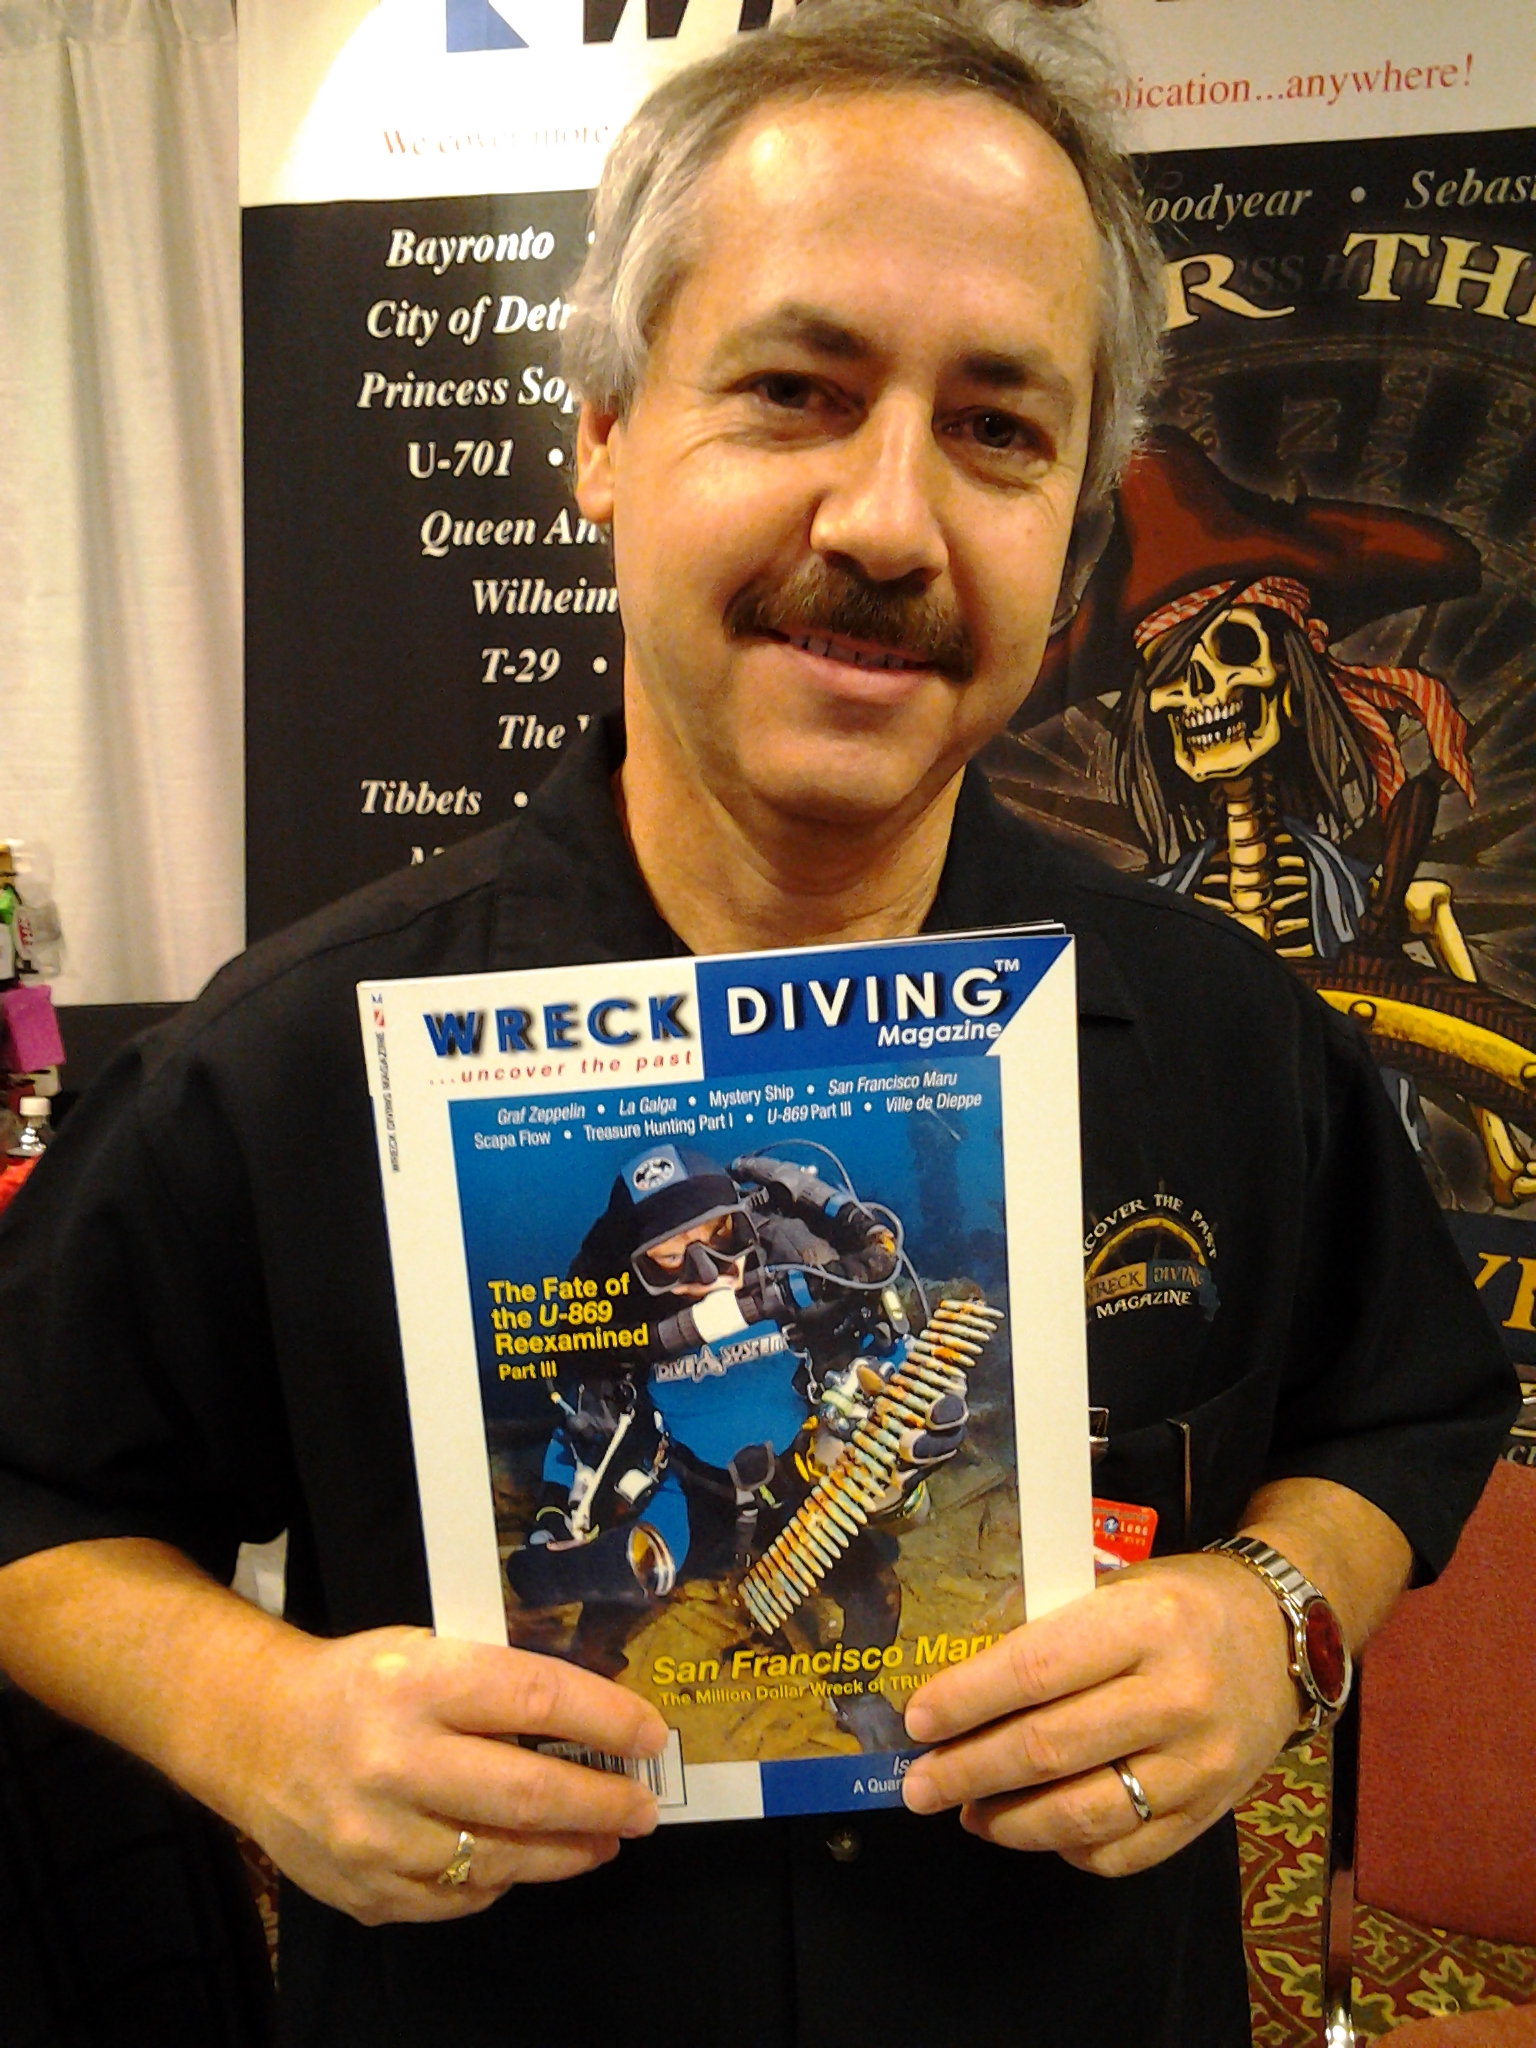 Joe Porter from Wreck Diving Mag @ Baltimore Dive Show